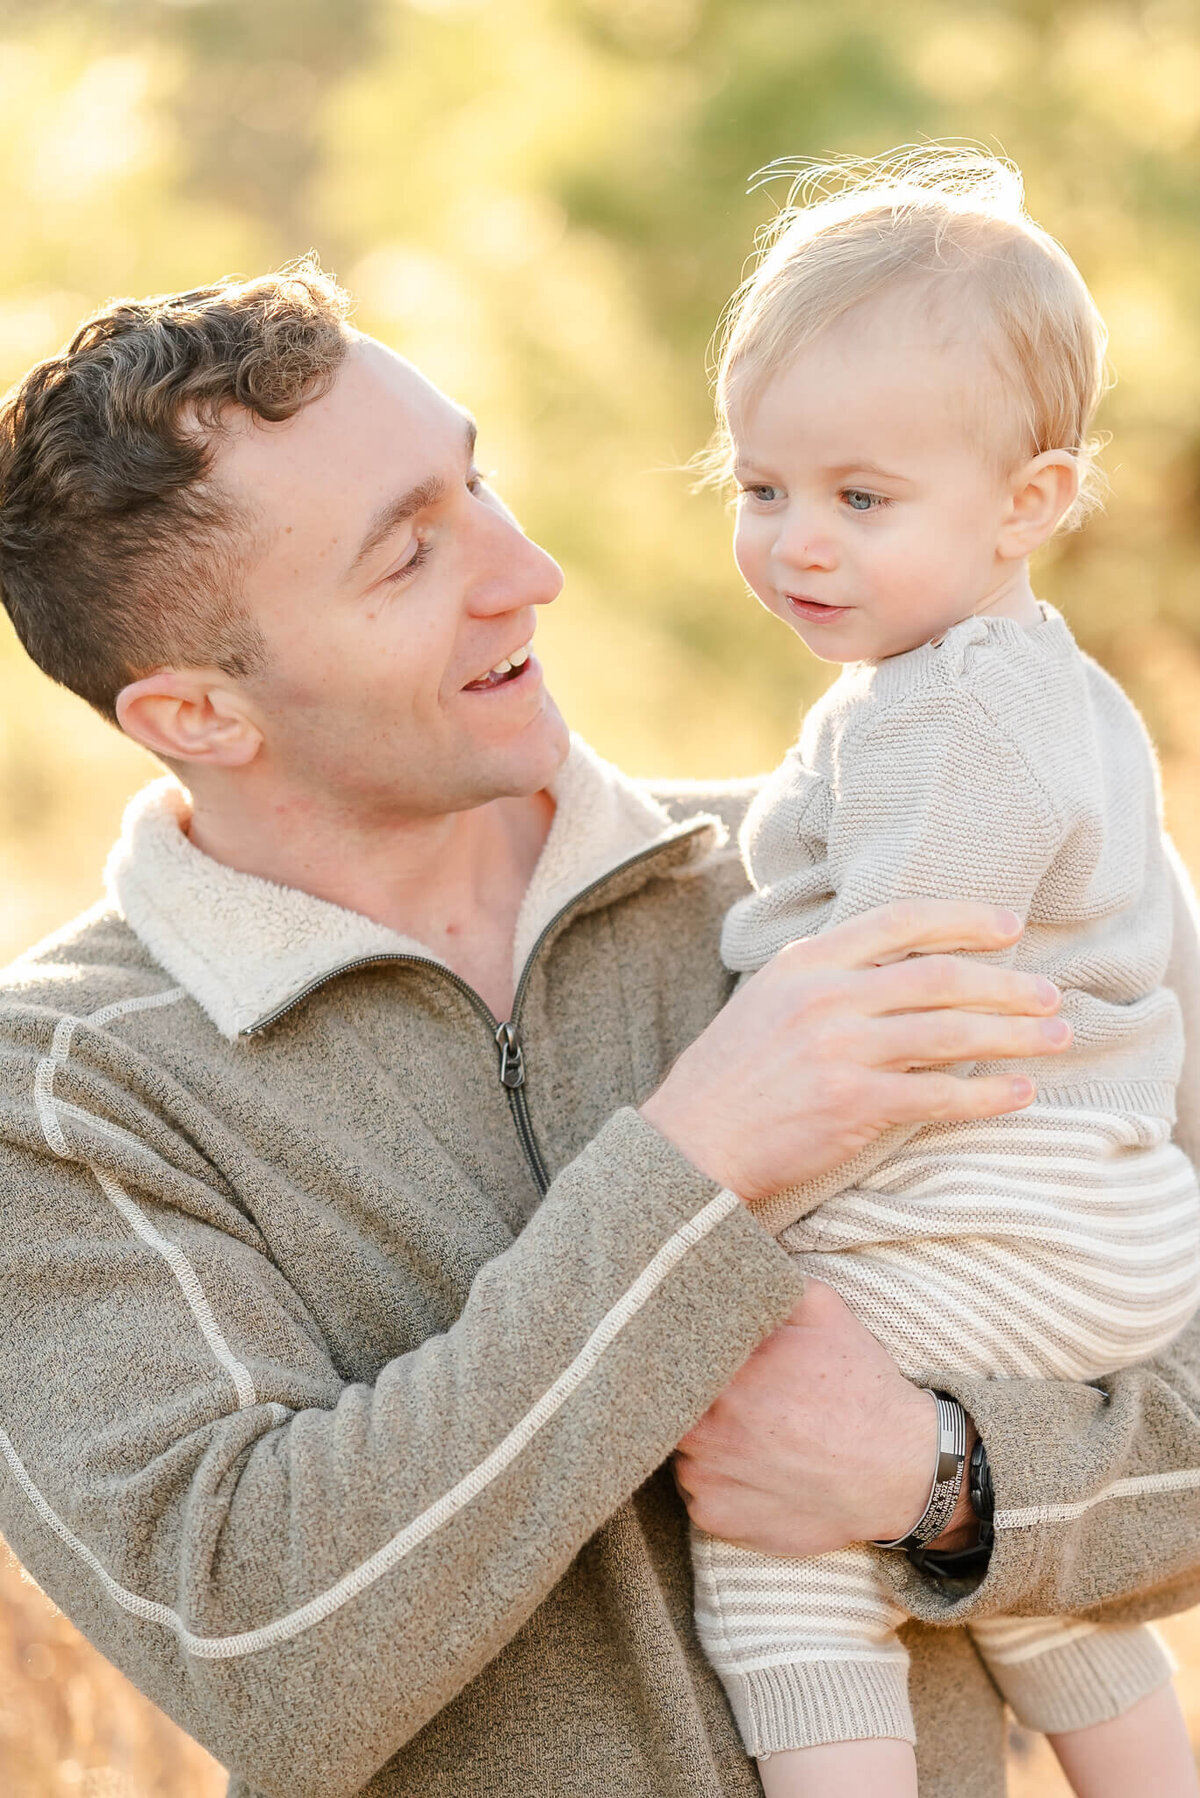 A man, wearing a neutral sweater, holds his toddler son, who is also wearing neutrals during a Norfolk family photoshoot.